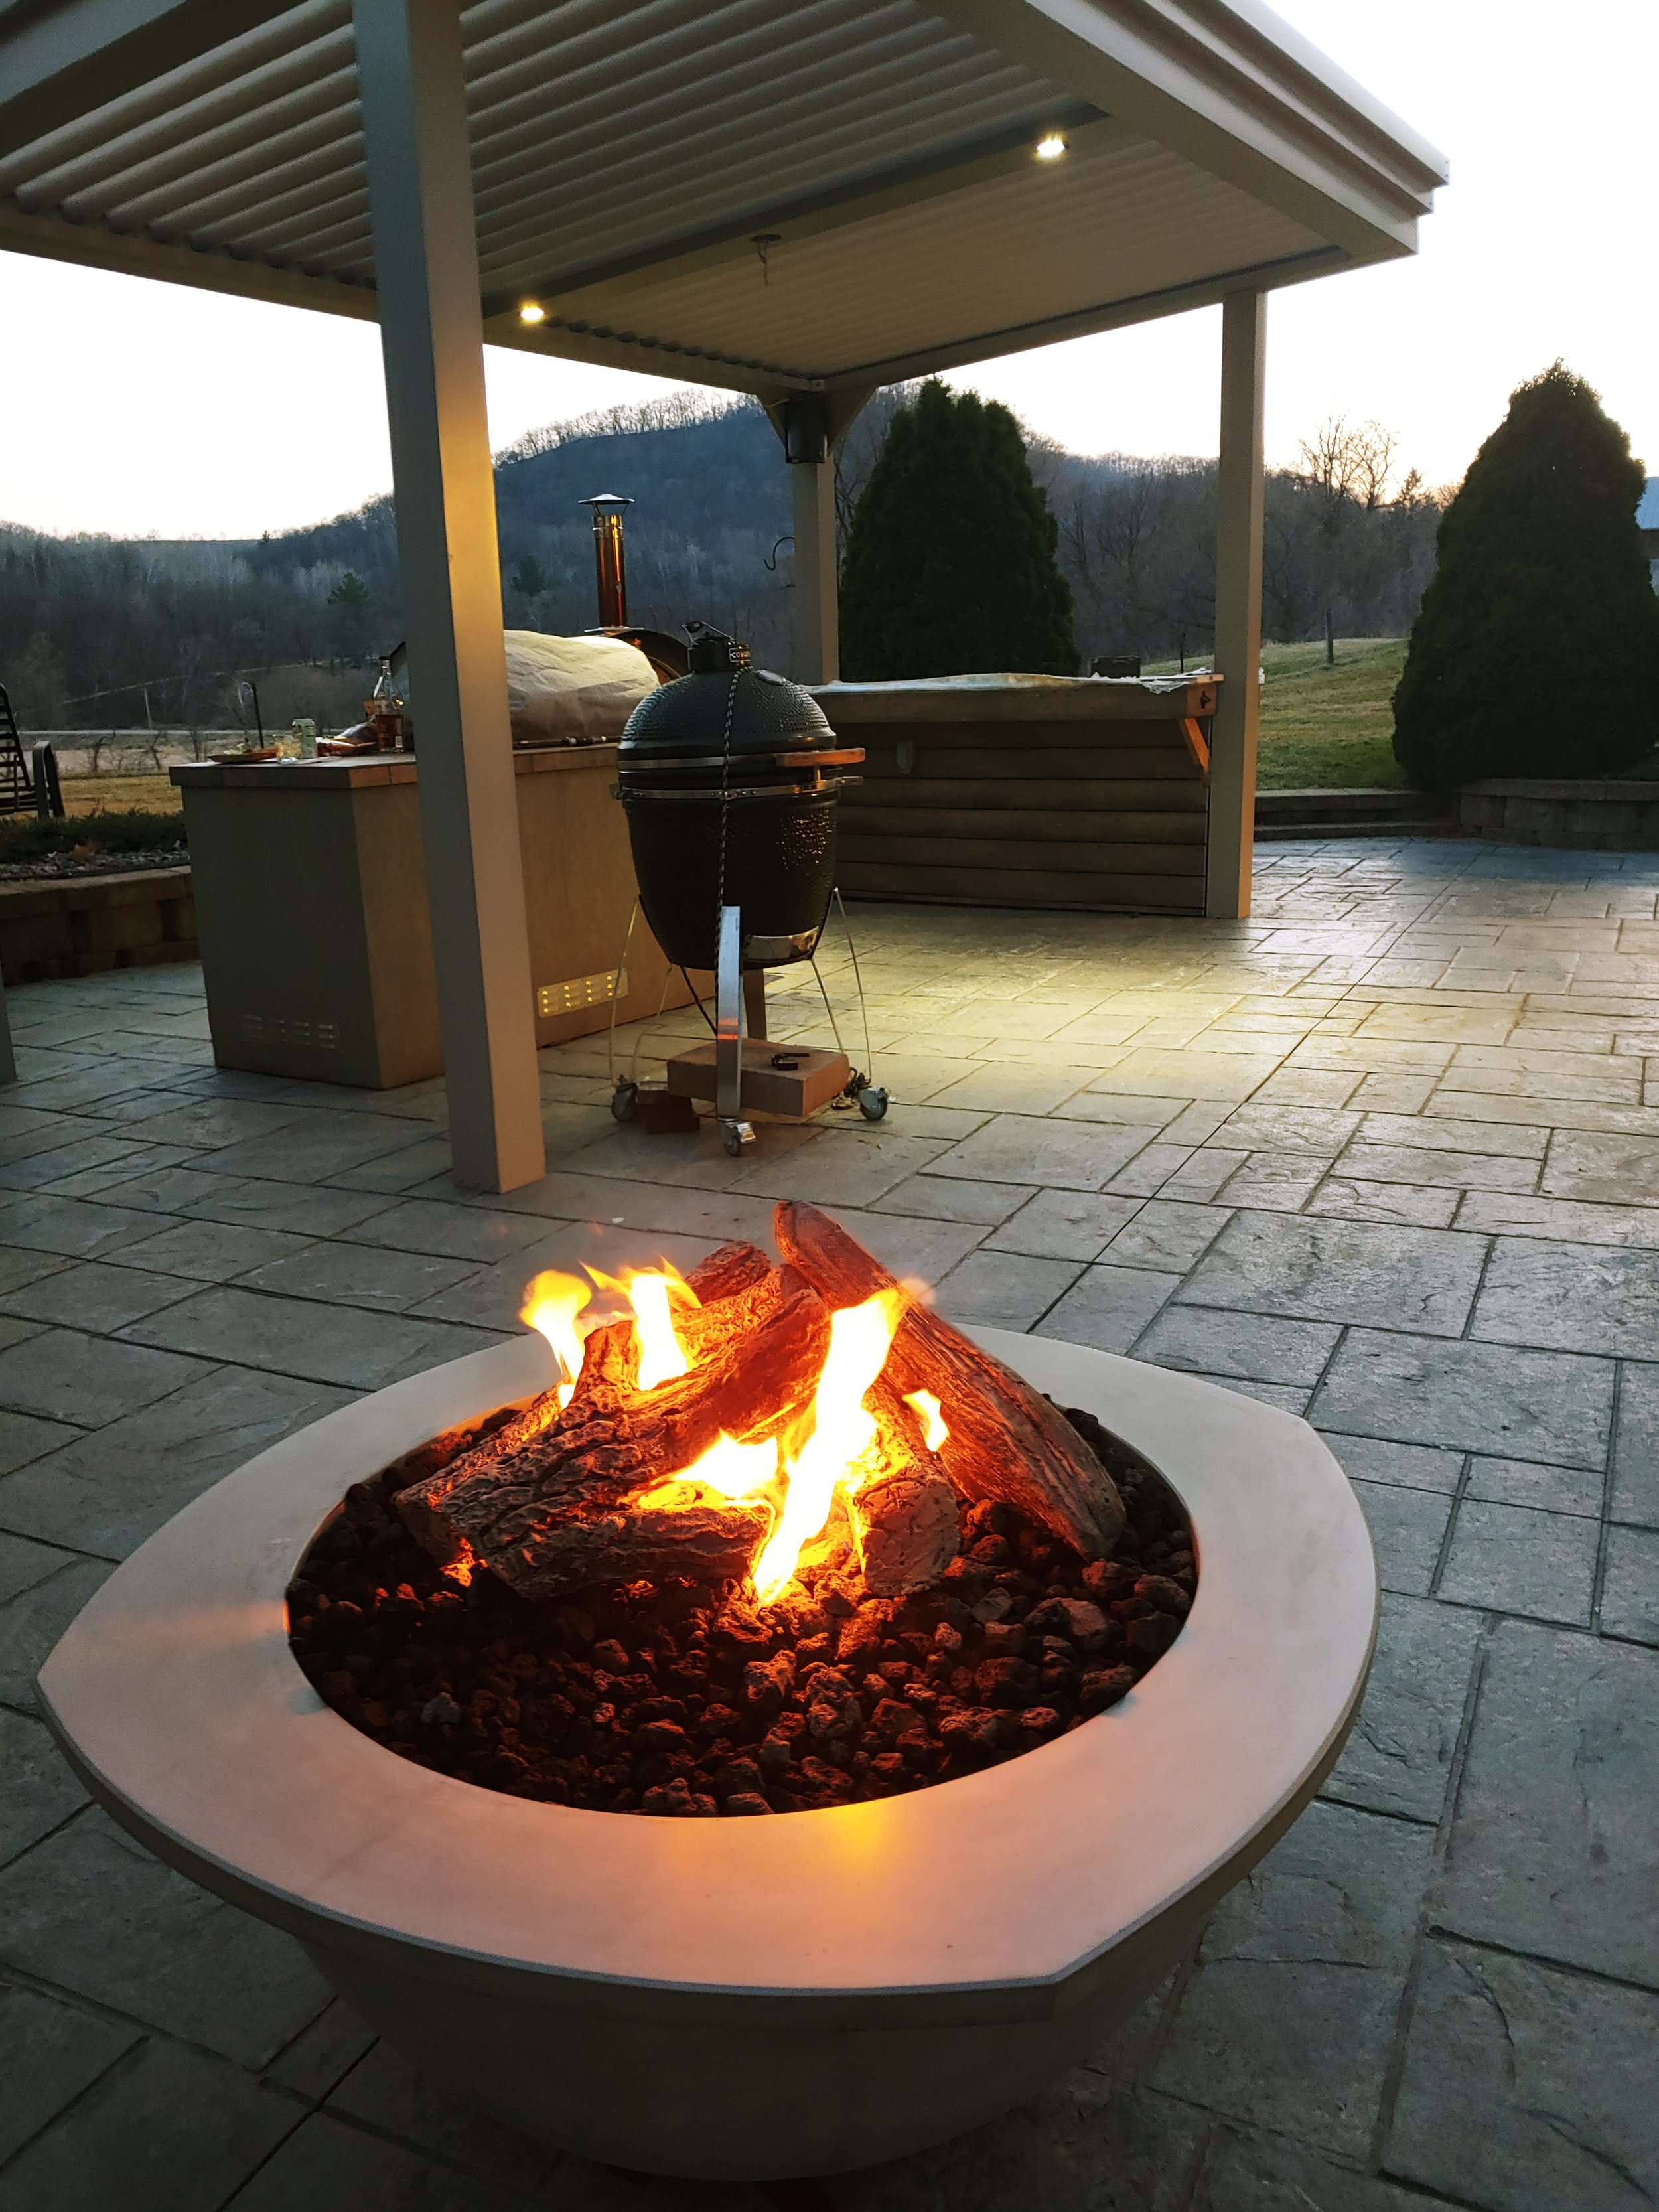 Pergola and Fire tale on patio.jpg